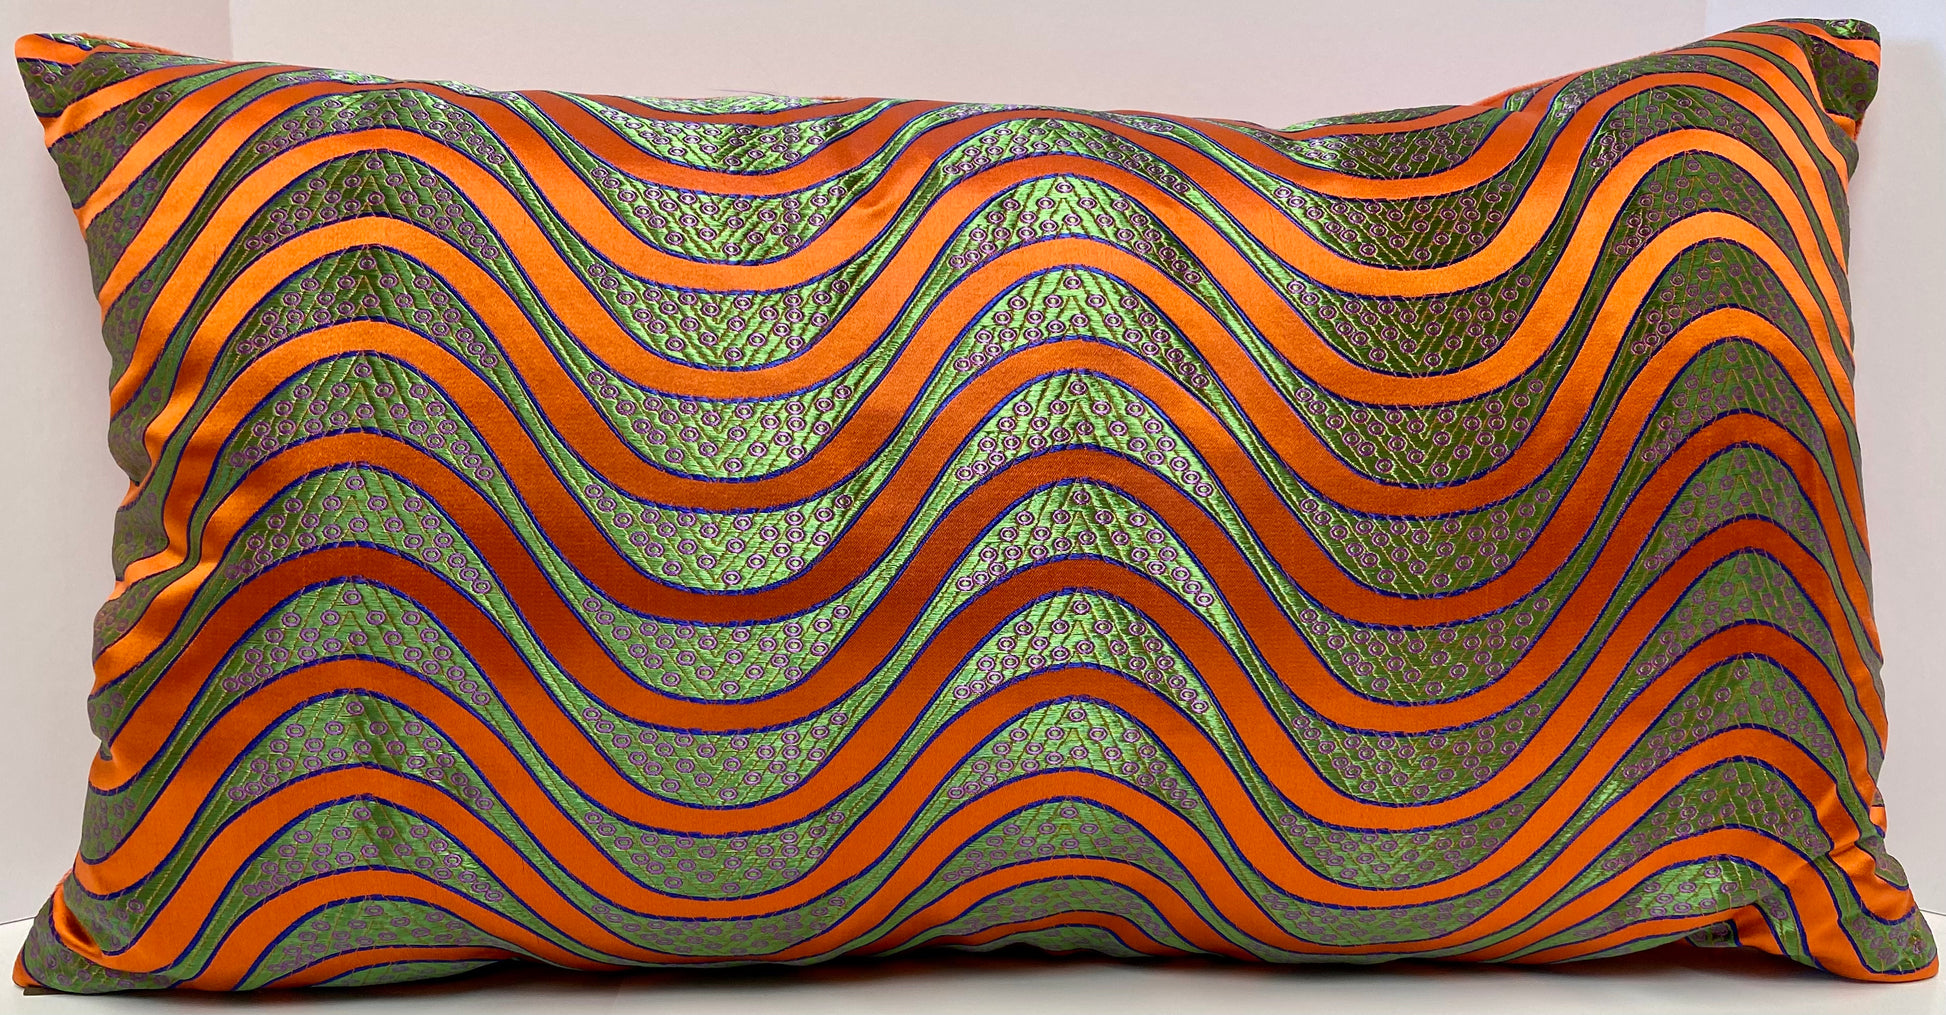 Luxury Lumbar Pillow; 24 x 14 - Swell, bright orange wavey stripes over a  pearlized green background all in a glamorous shiny fabric